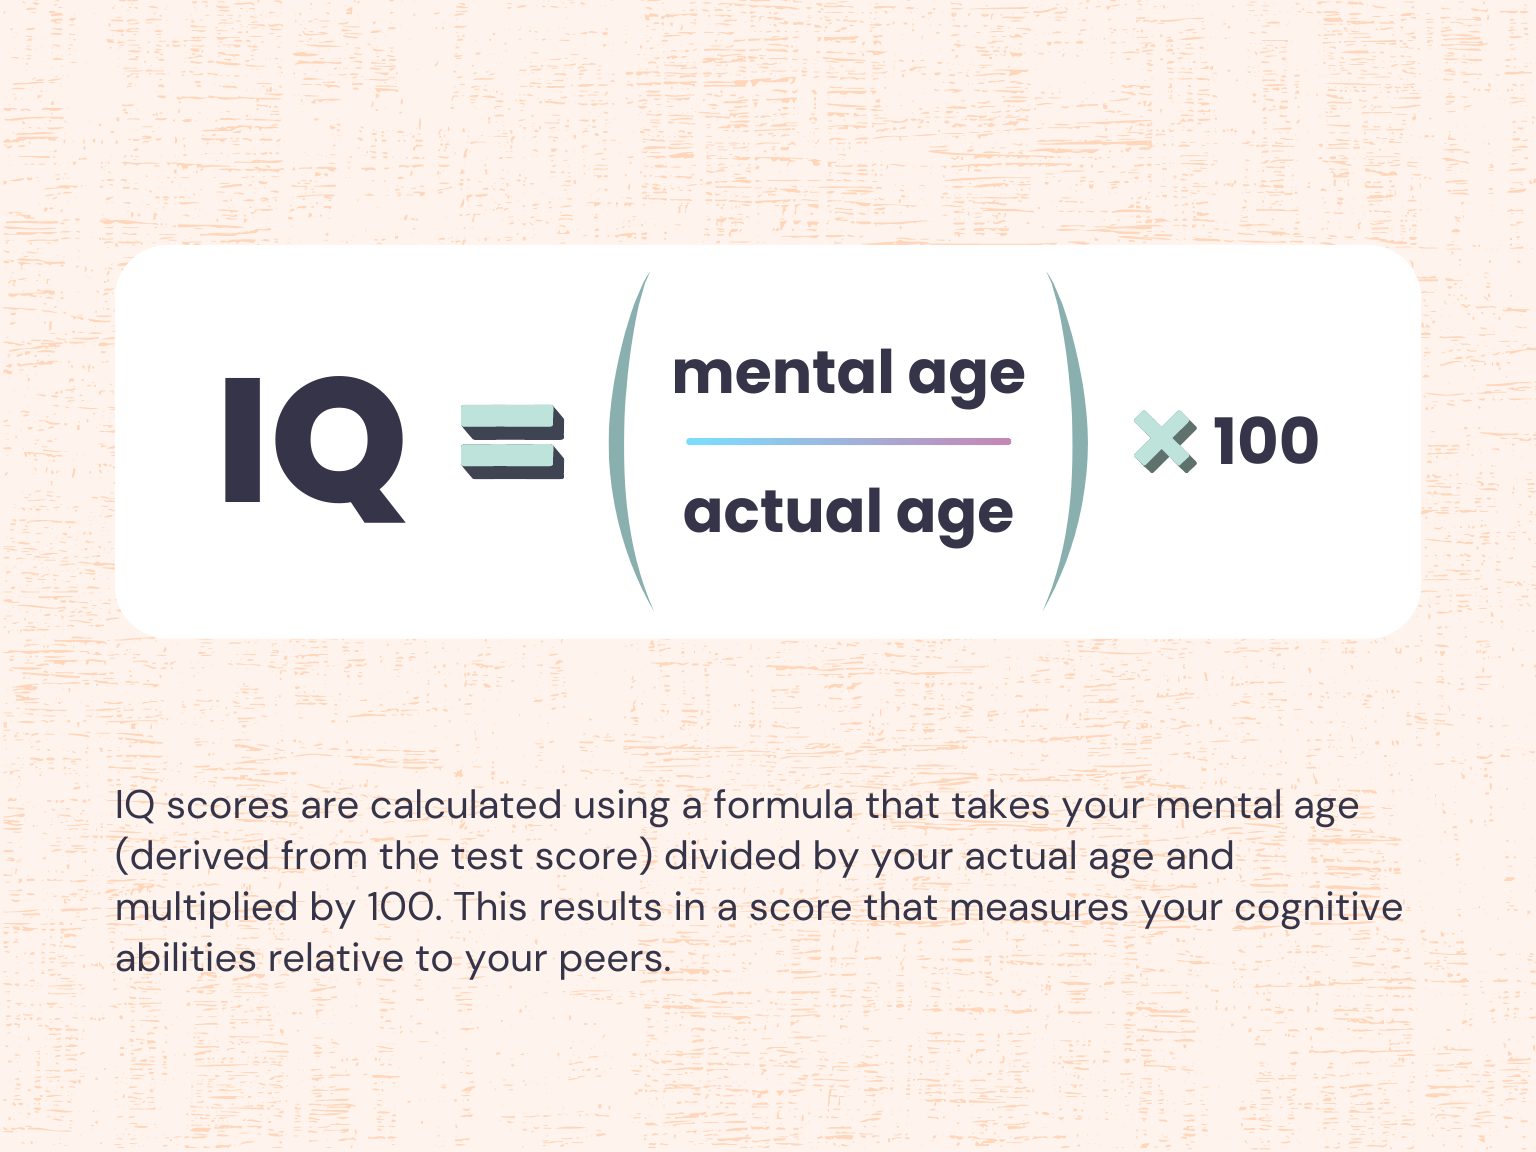 Image shows the equation for calculating IQ. IQ = mental age divided by actual age, multiplied by 100. Description on the graphic: IQ scores are calculated using a formula that takes your mental age (derived from the test score) divided by your actual age and multiplied by 100. This results in a score that measures your cognitive abilities relative to your peers.